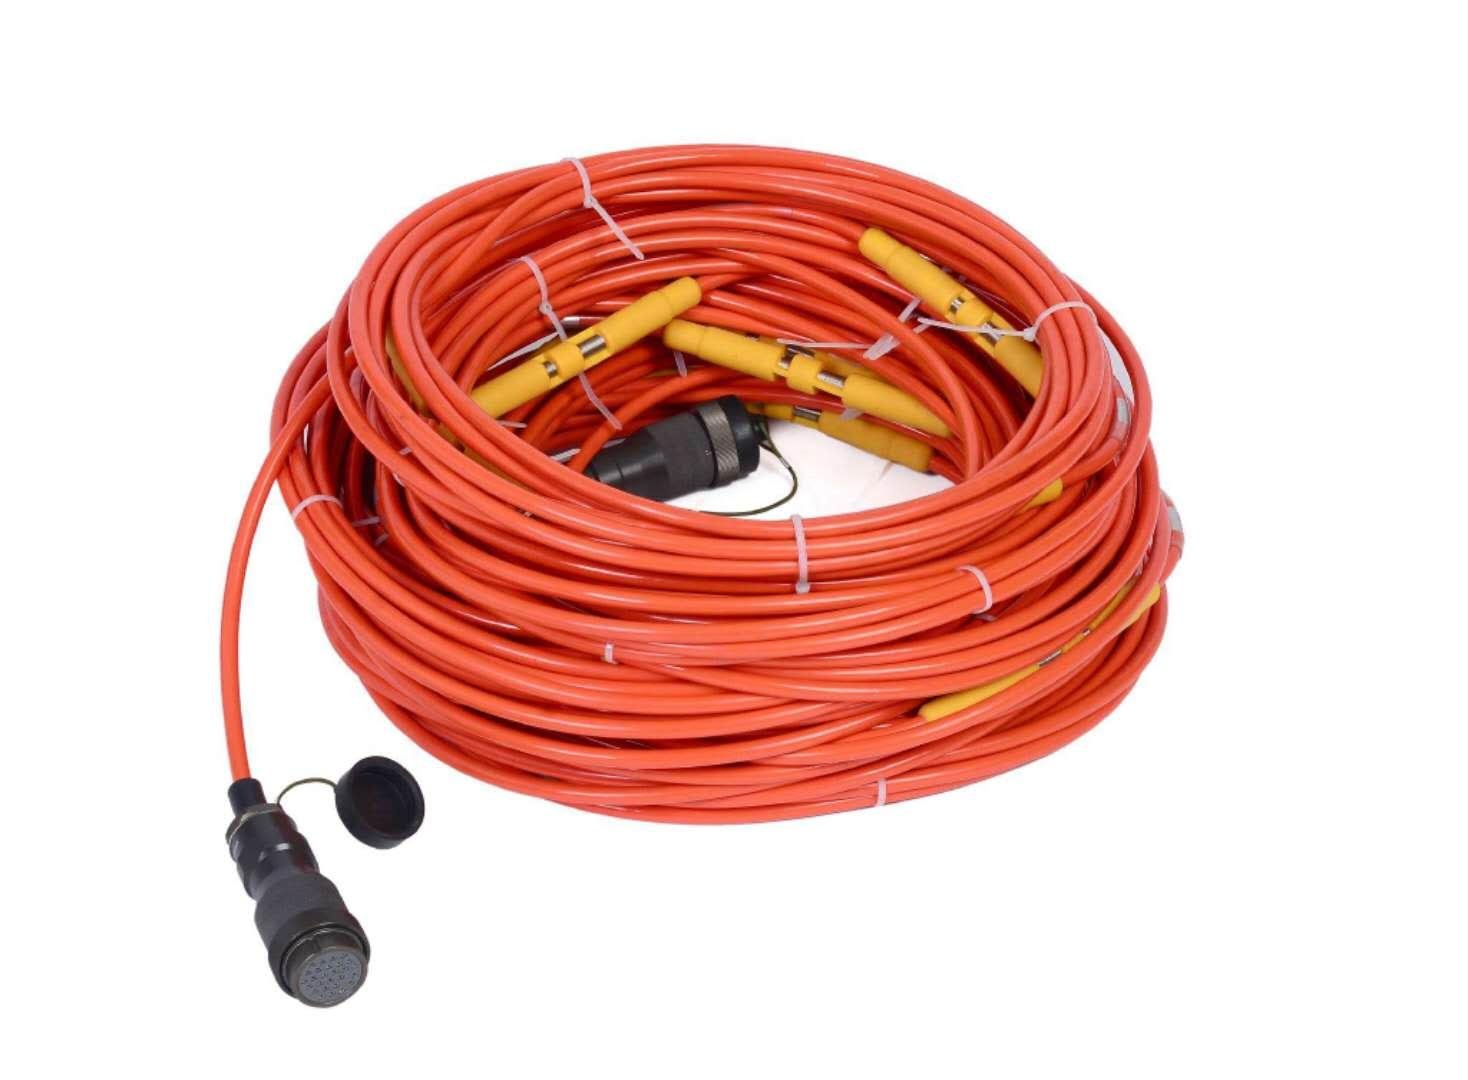 ZRXY GEODESmall refraction cable seismic exploration instrument